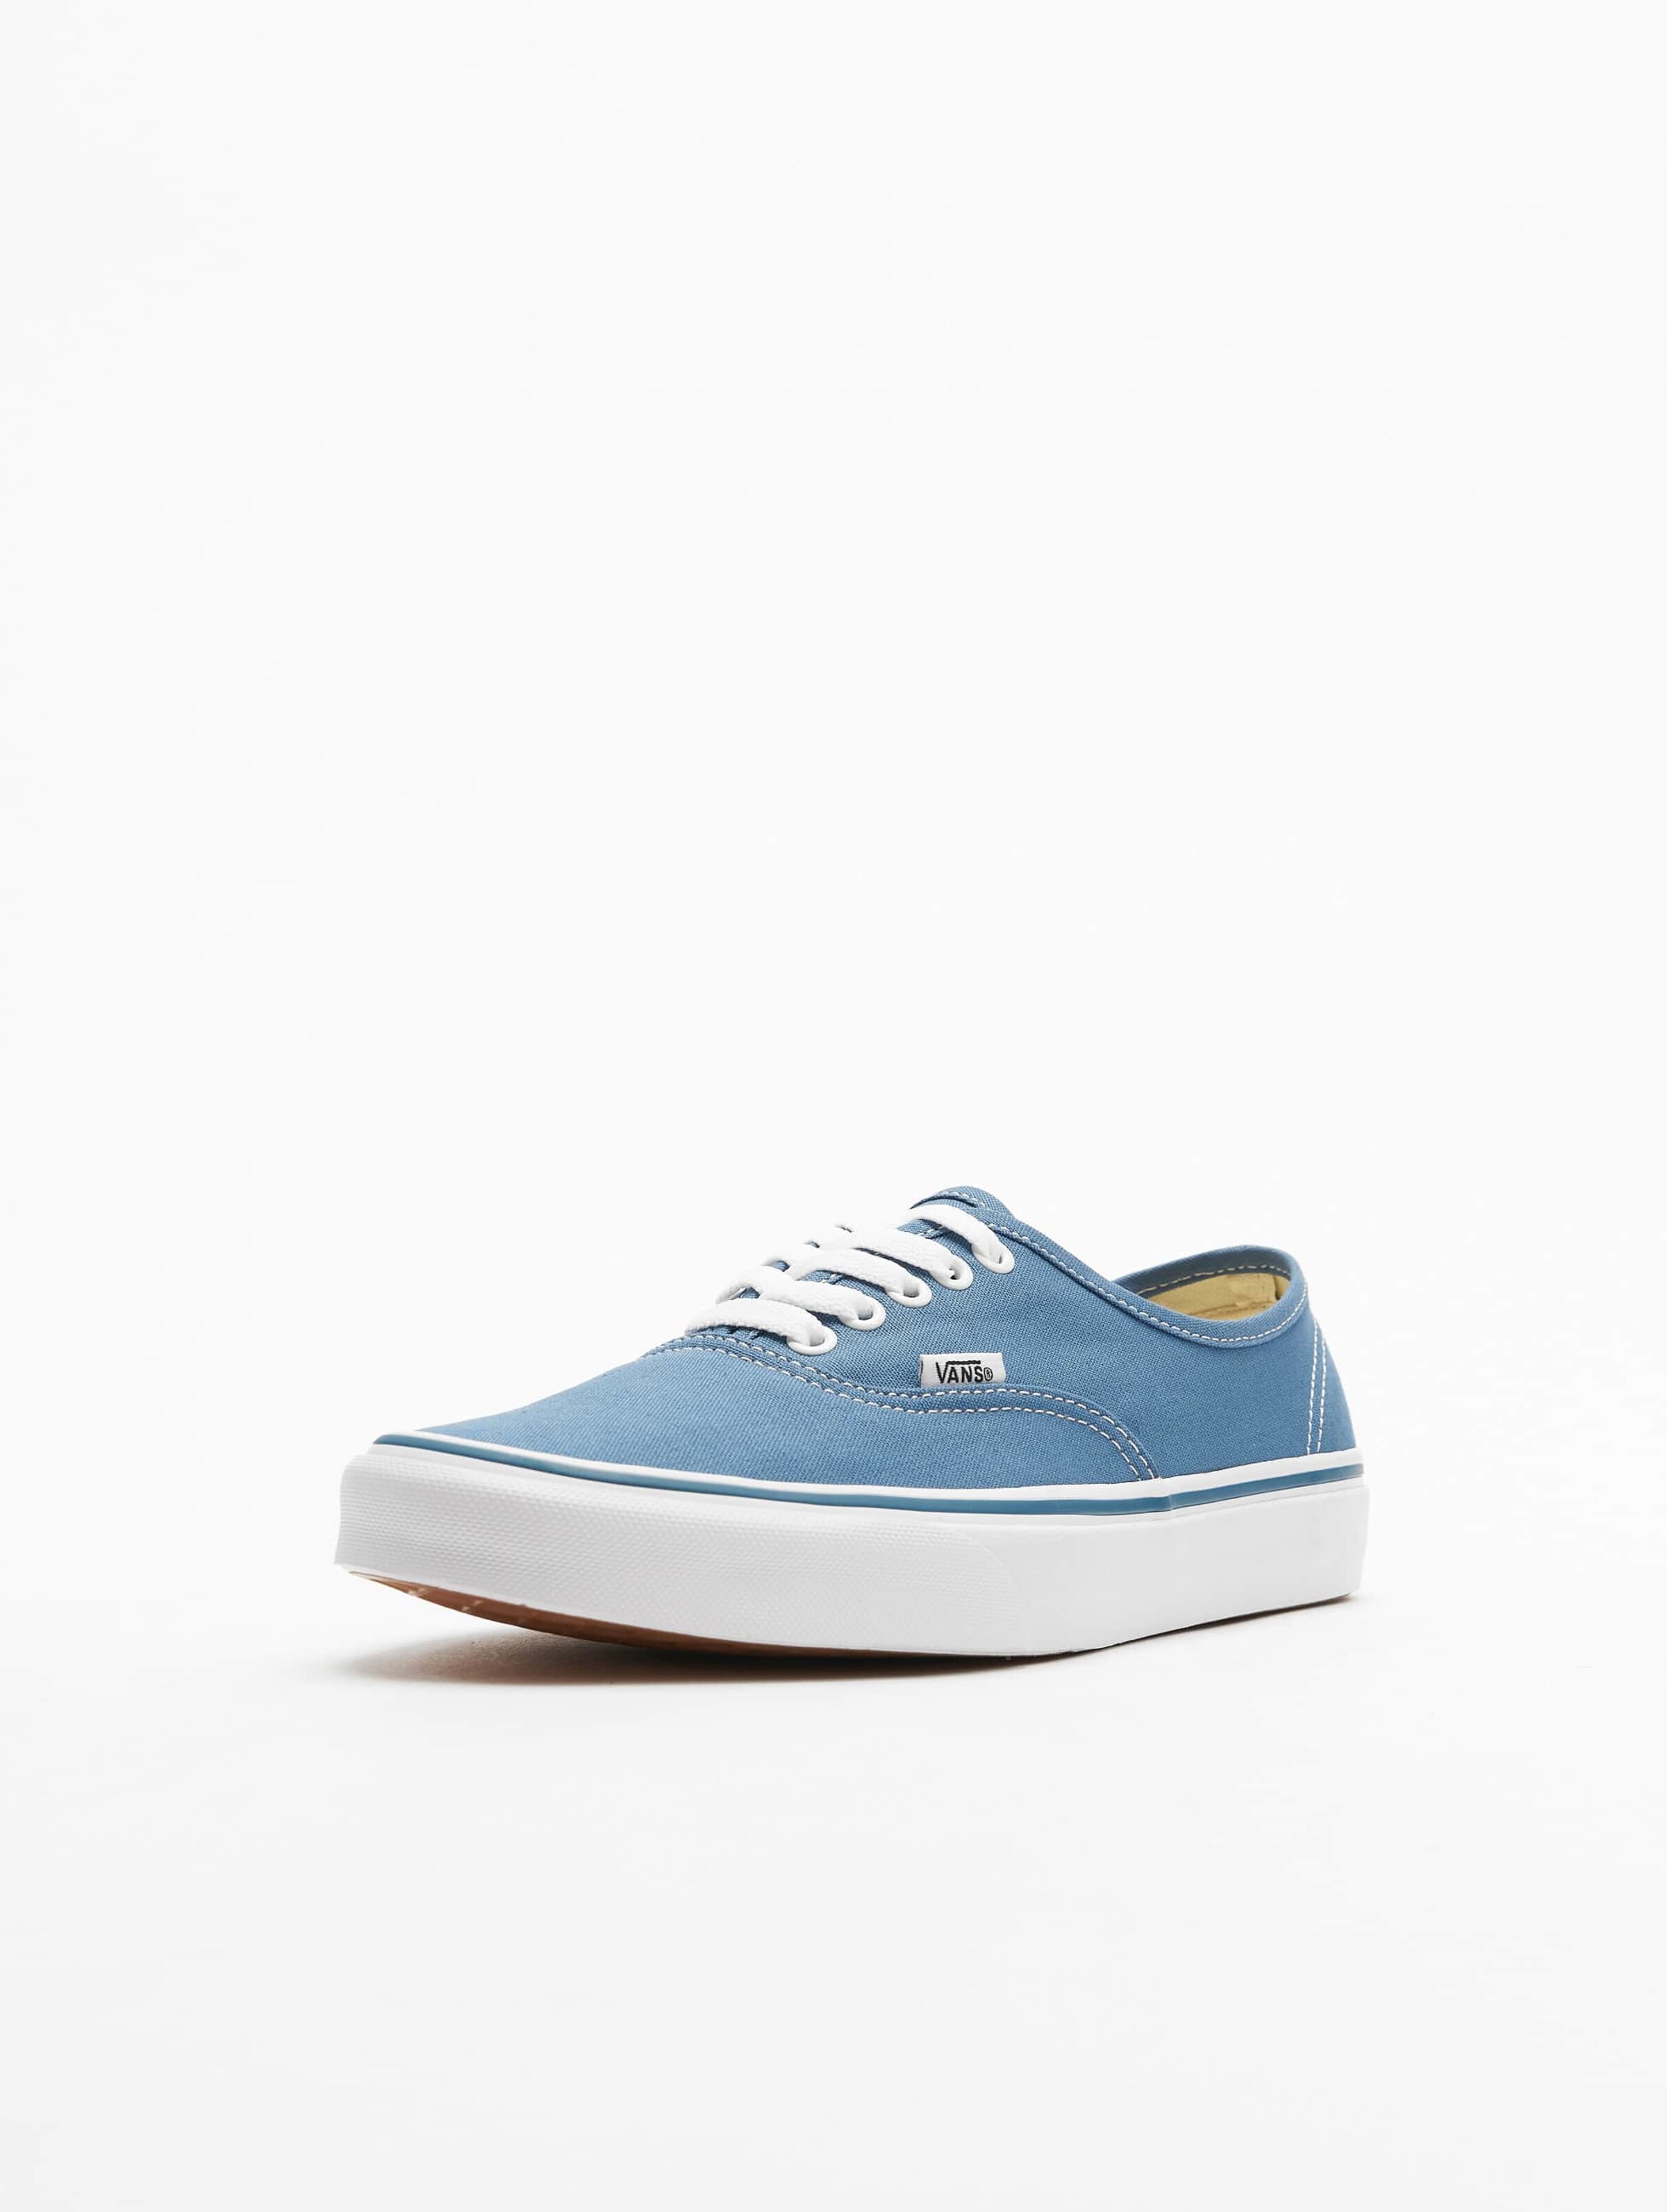 MENS VANS AUTHENTIC | Boathouse Footwear Collective